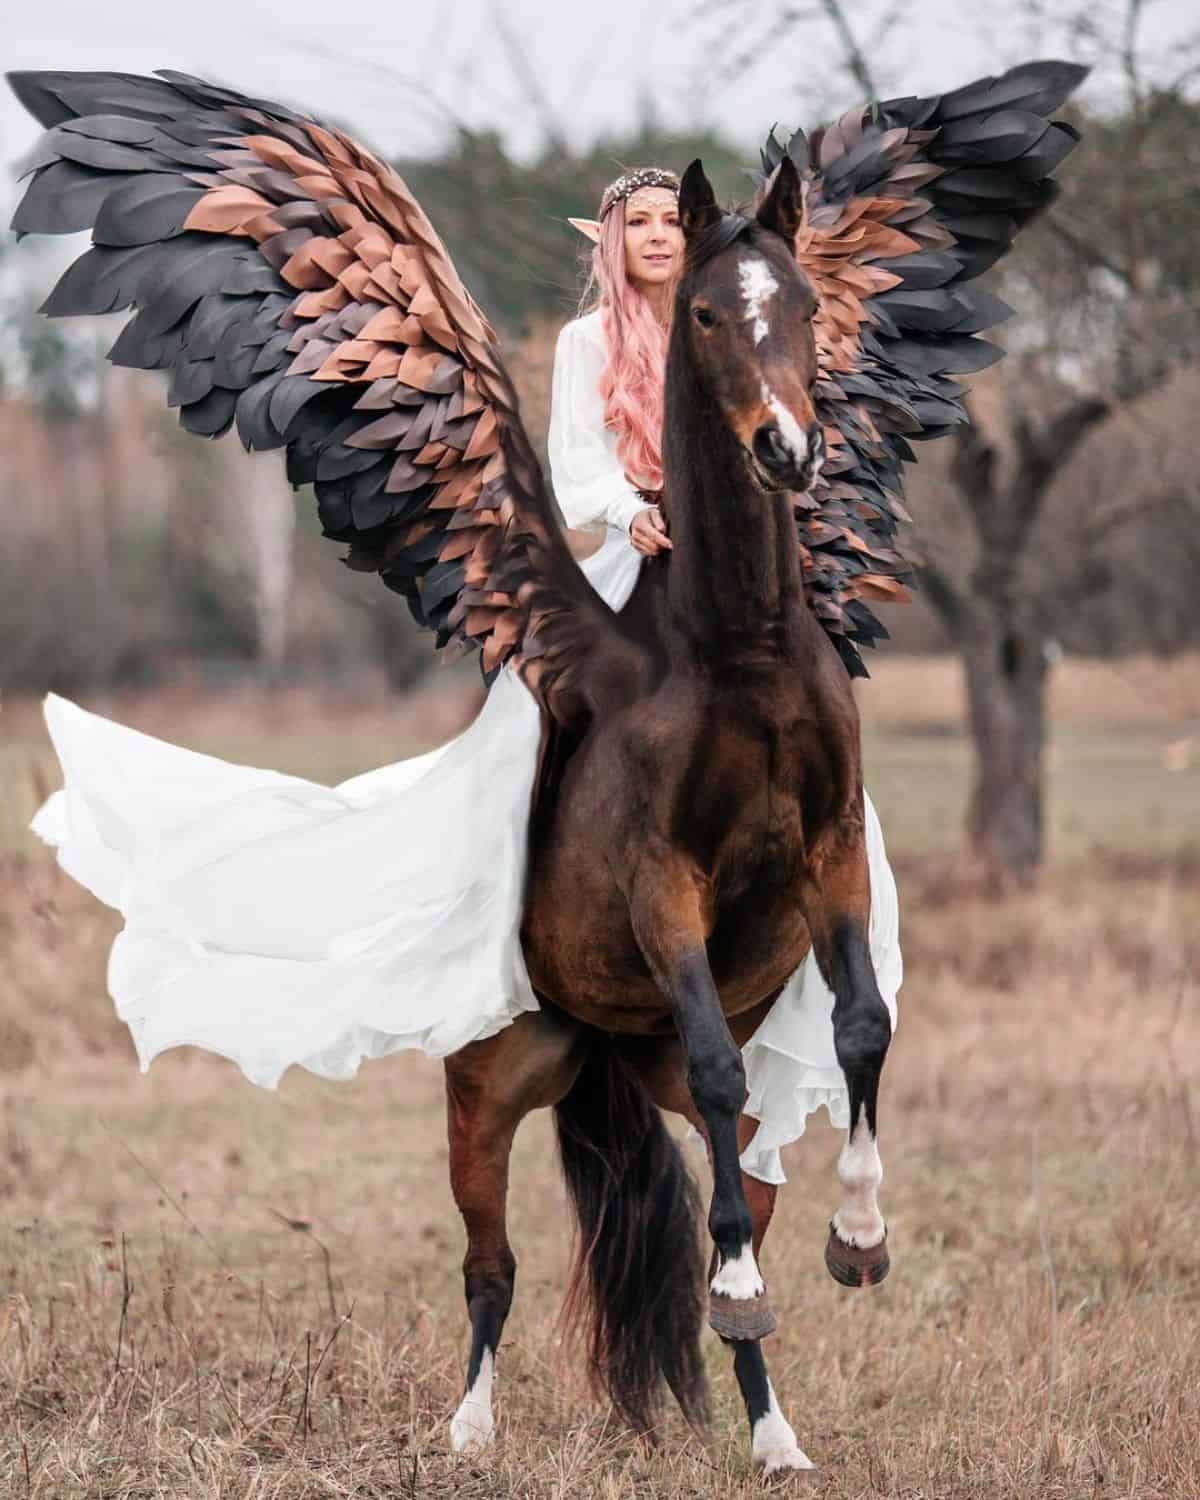 A young woman disguised as elf sits on a brown horse with artificial wings.